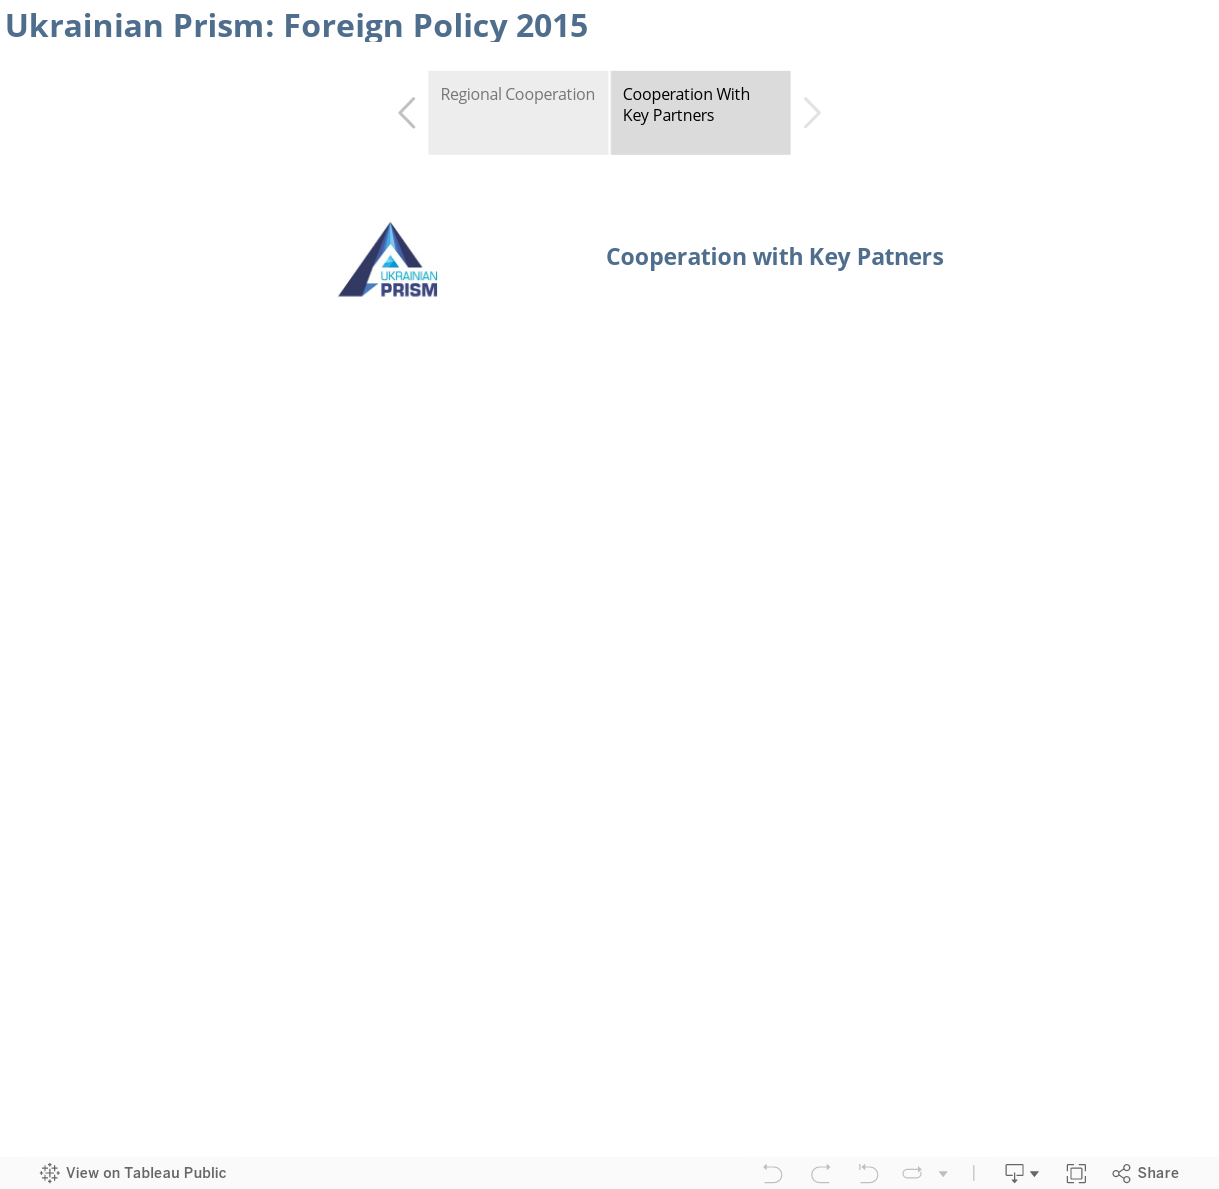 Ukrainian Prism: Foreign Policy 2015 